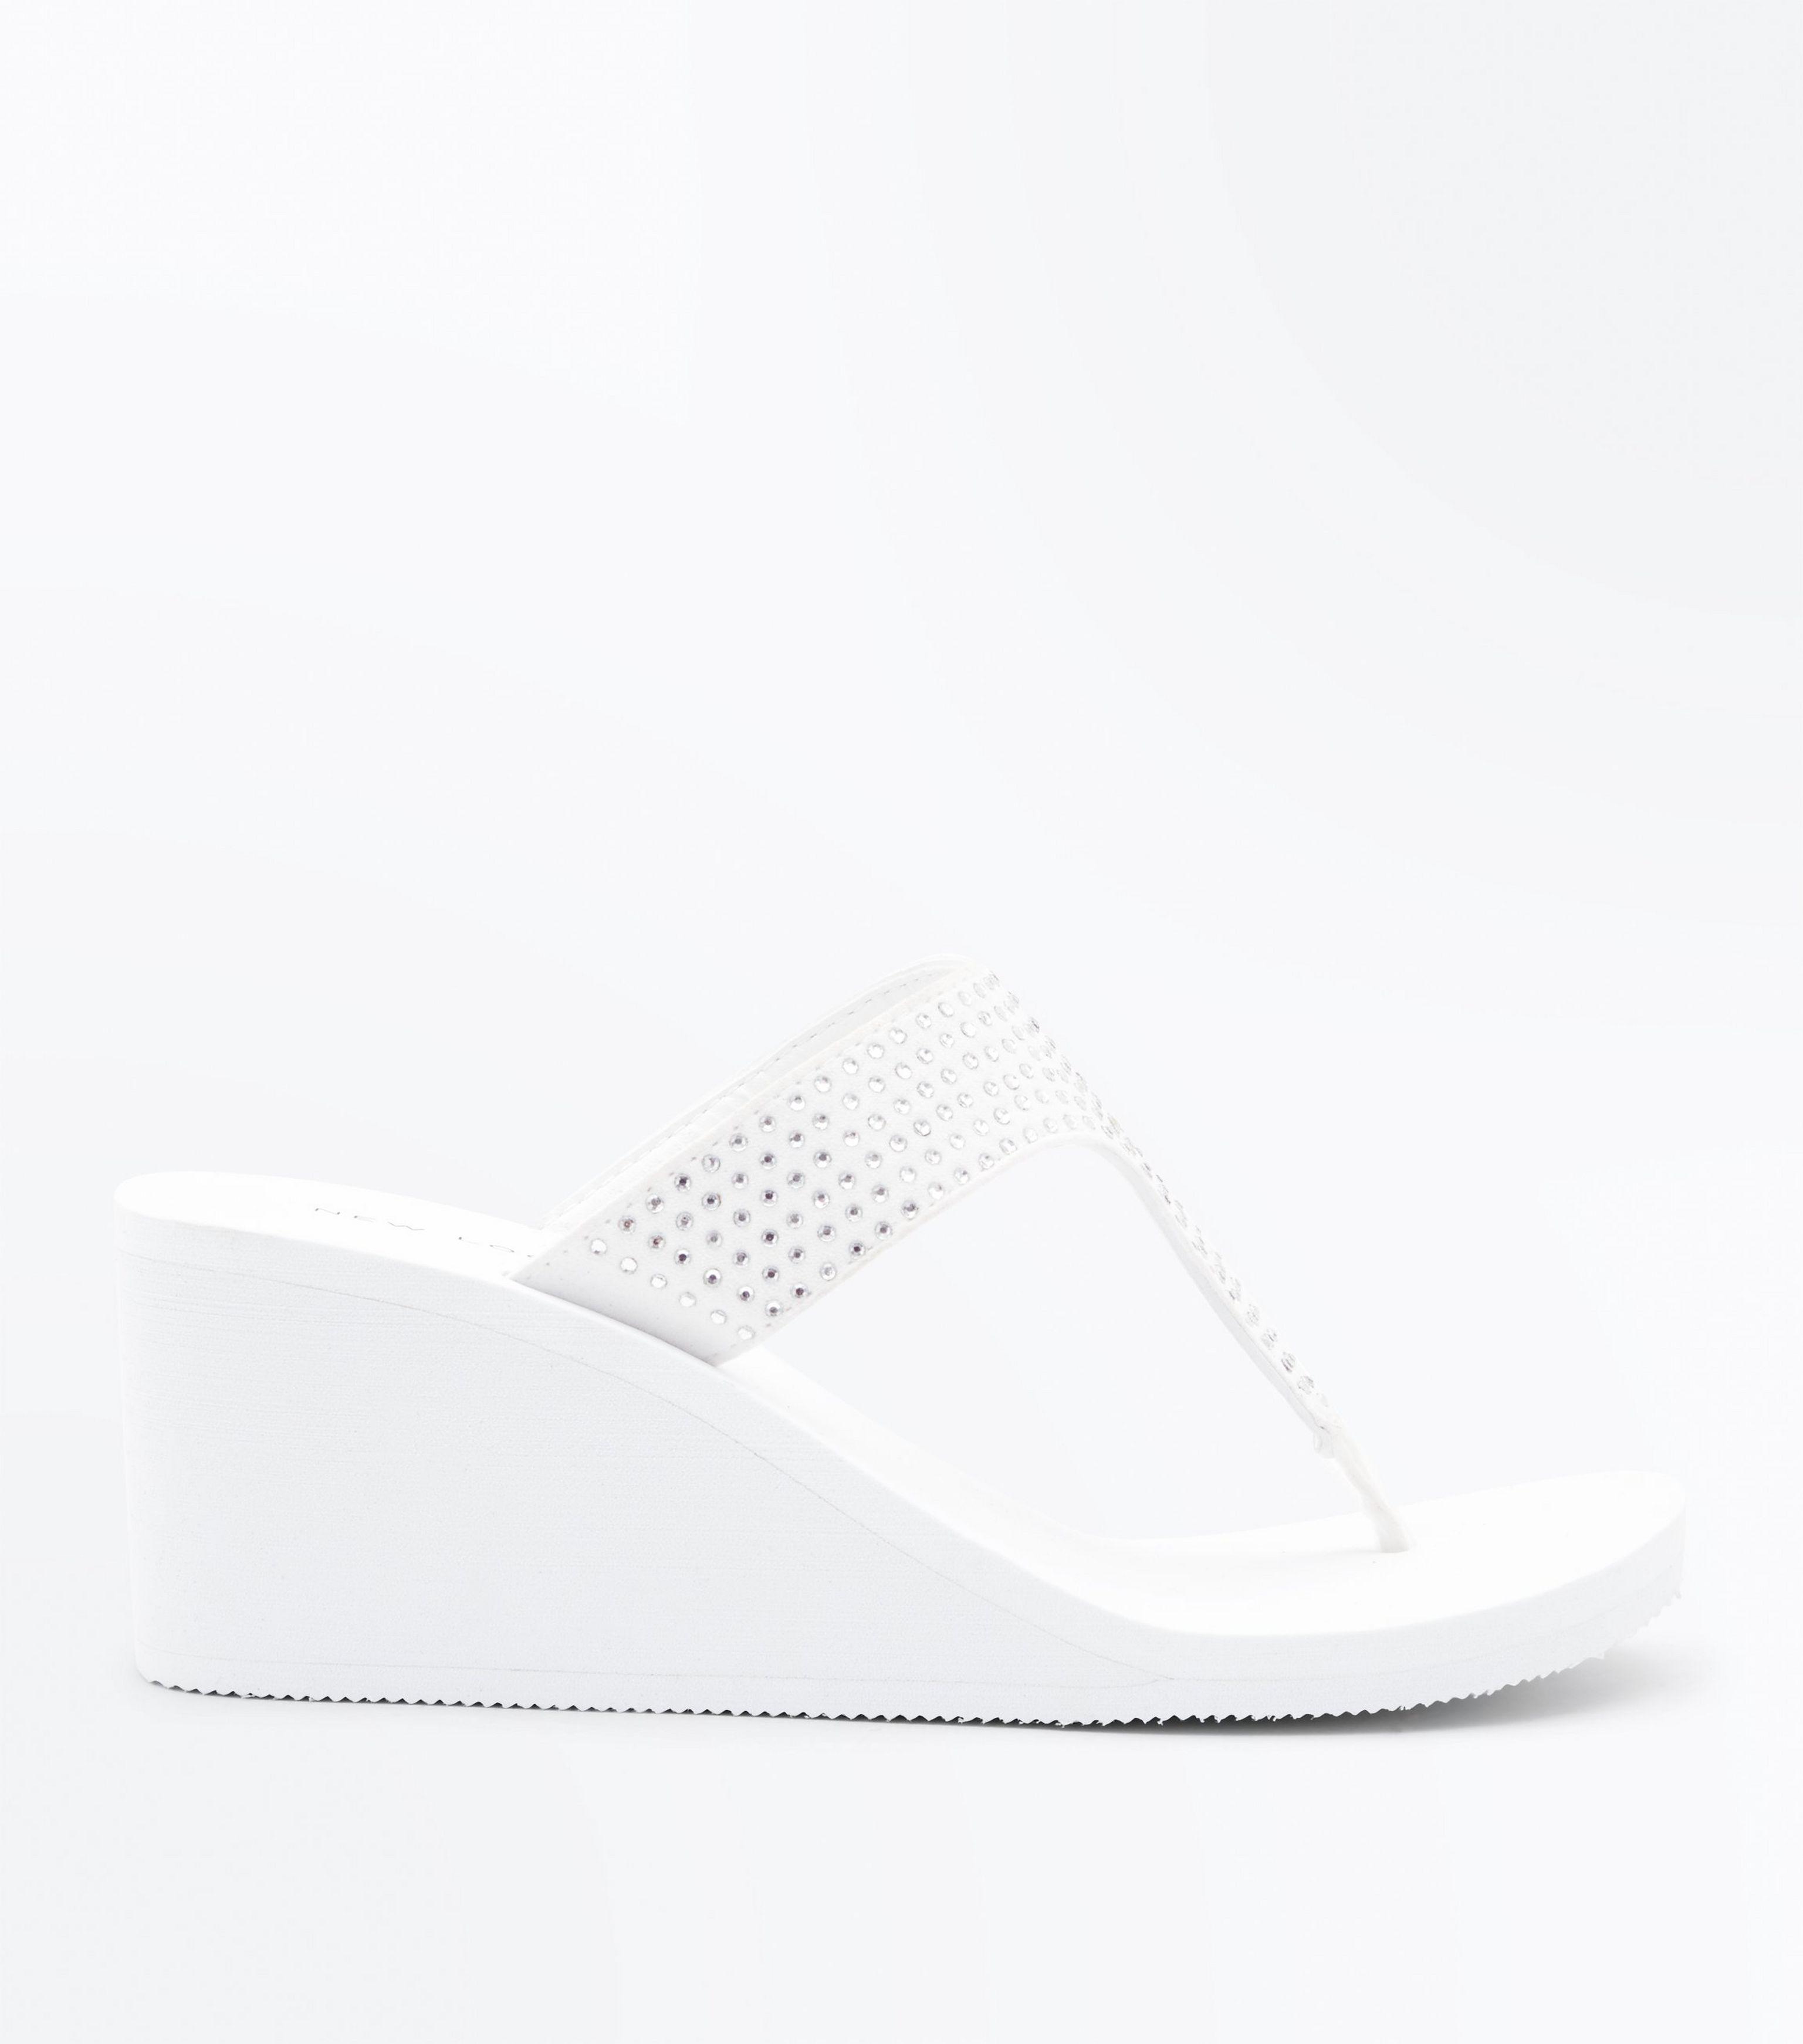 new look white wedges